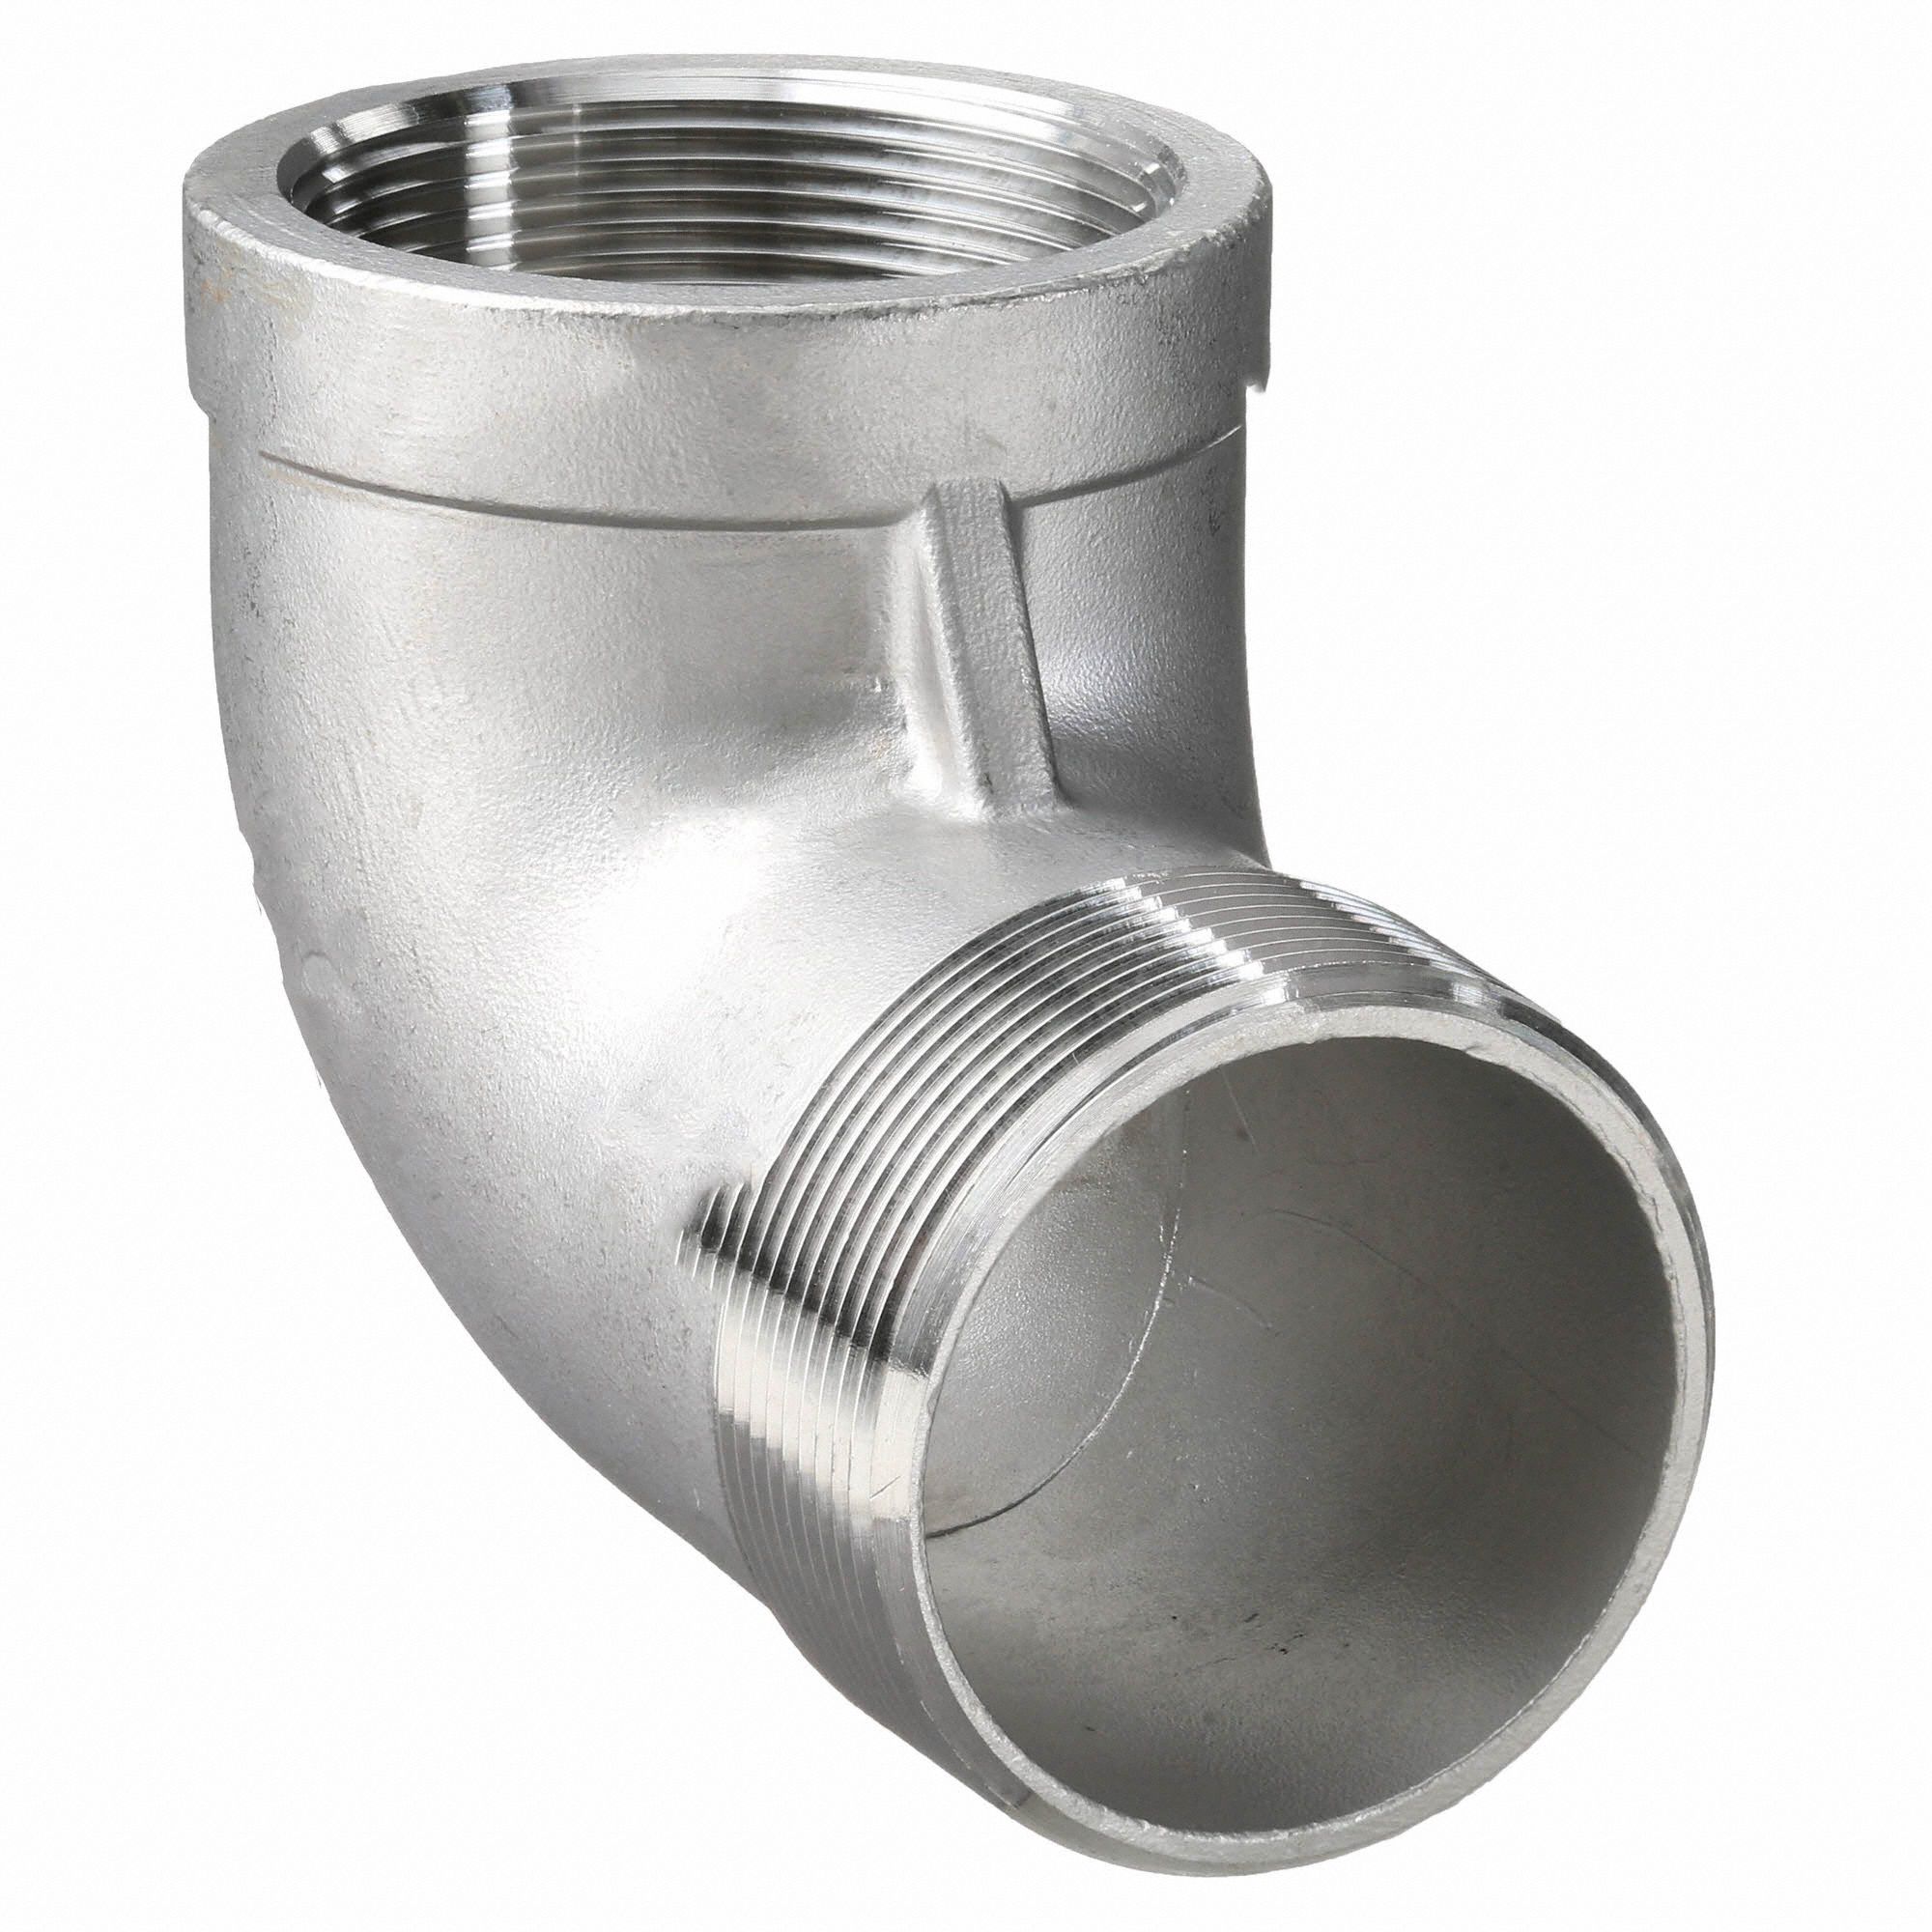 1/2" Pipe Fitting Female x Male NPT 304 Stainless Steel 90 Degree Street Elbow 